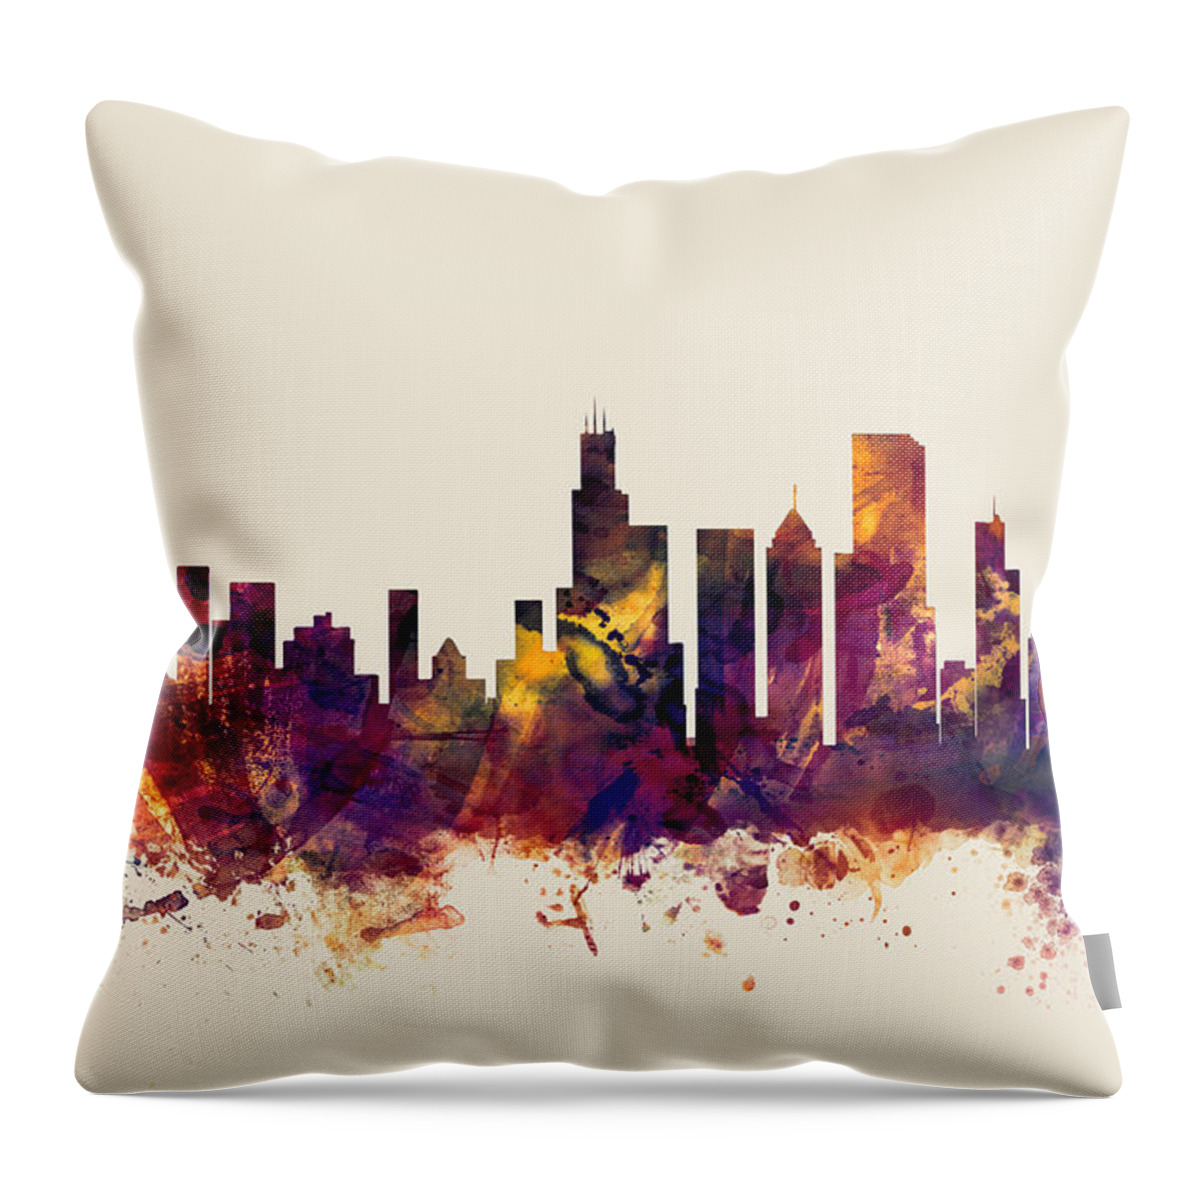 Chicago Throw Pillow featuring the digital art Chicago Illinois Skyline #8 by Michael Tompsett